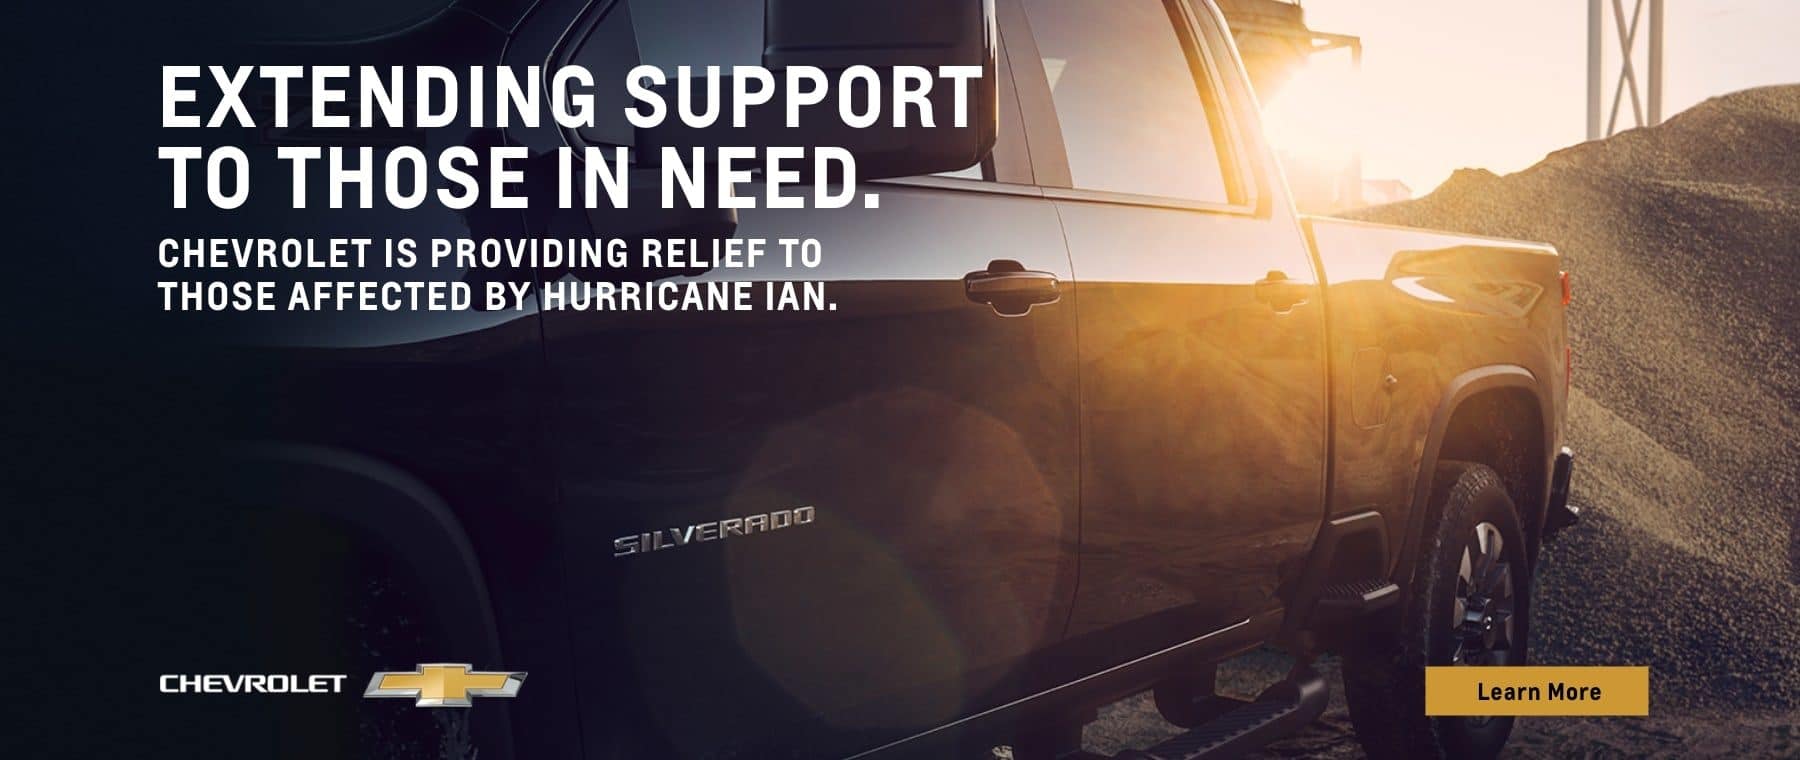 Chevy is providing support to those affected by Hurricane Ian